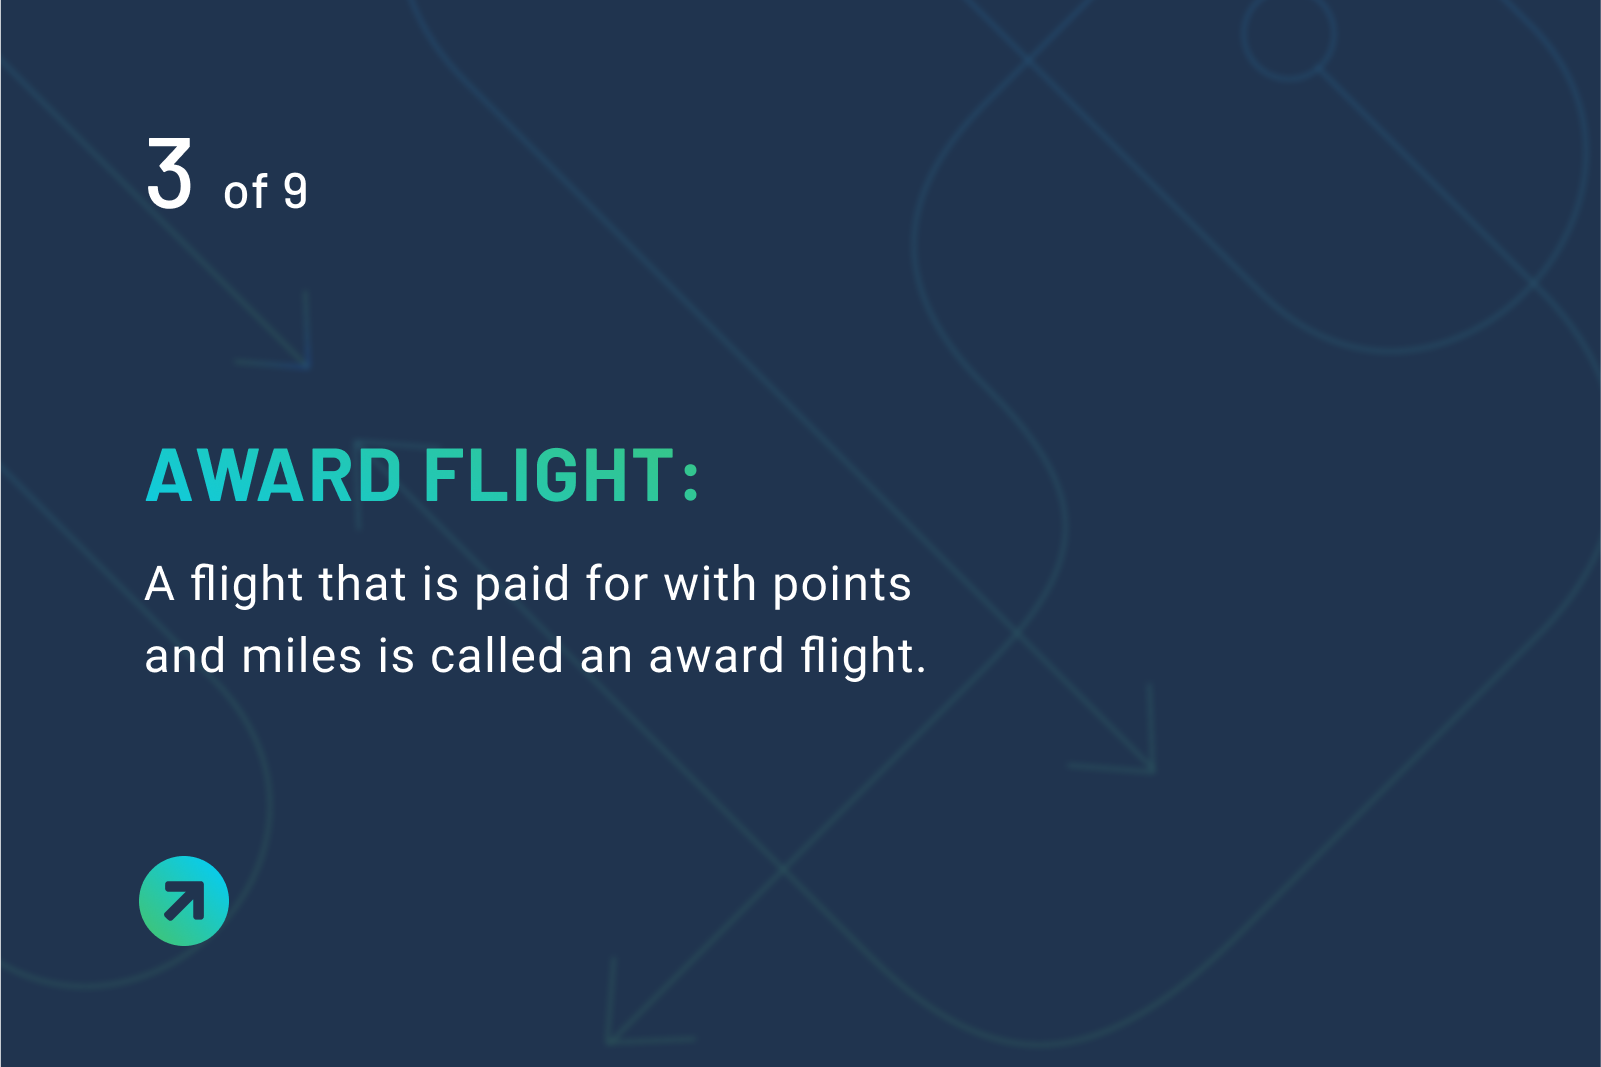 Award flight definition: A flight that is paid for with points and miles is called an award flight.